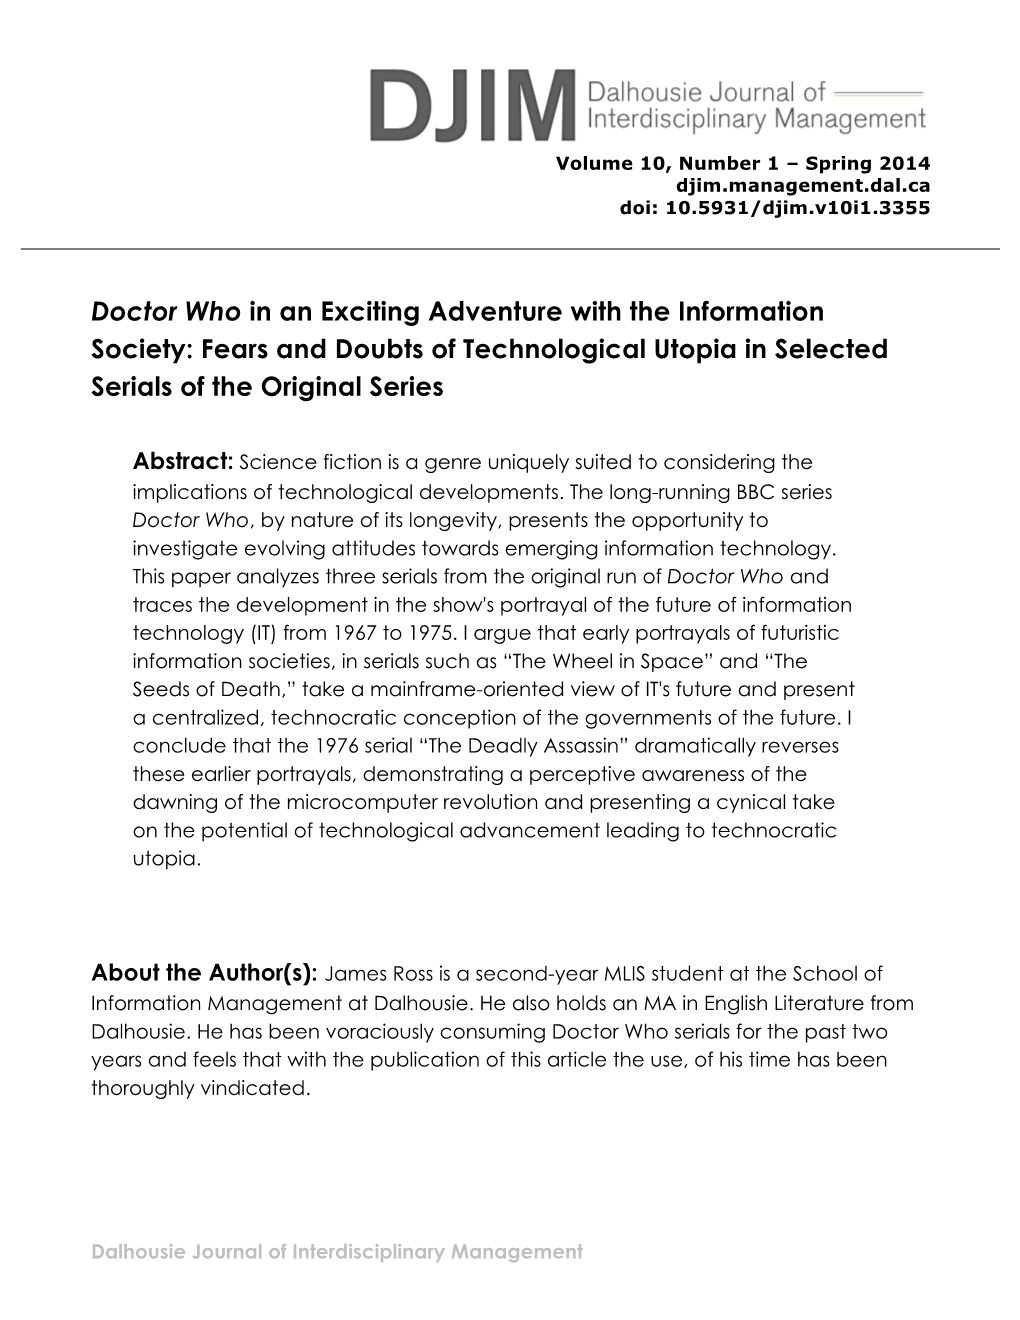 Doctor Who in an Exciting Adventure with the Information Society: Fears and Doubts of Technological Utopia in Selected Serials of the Original Series